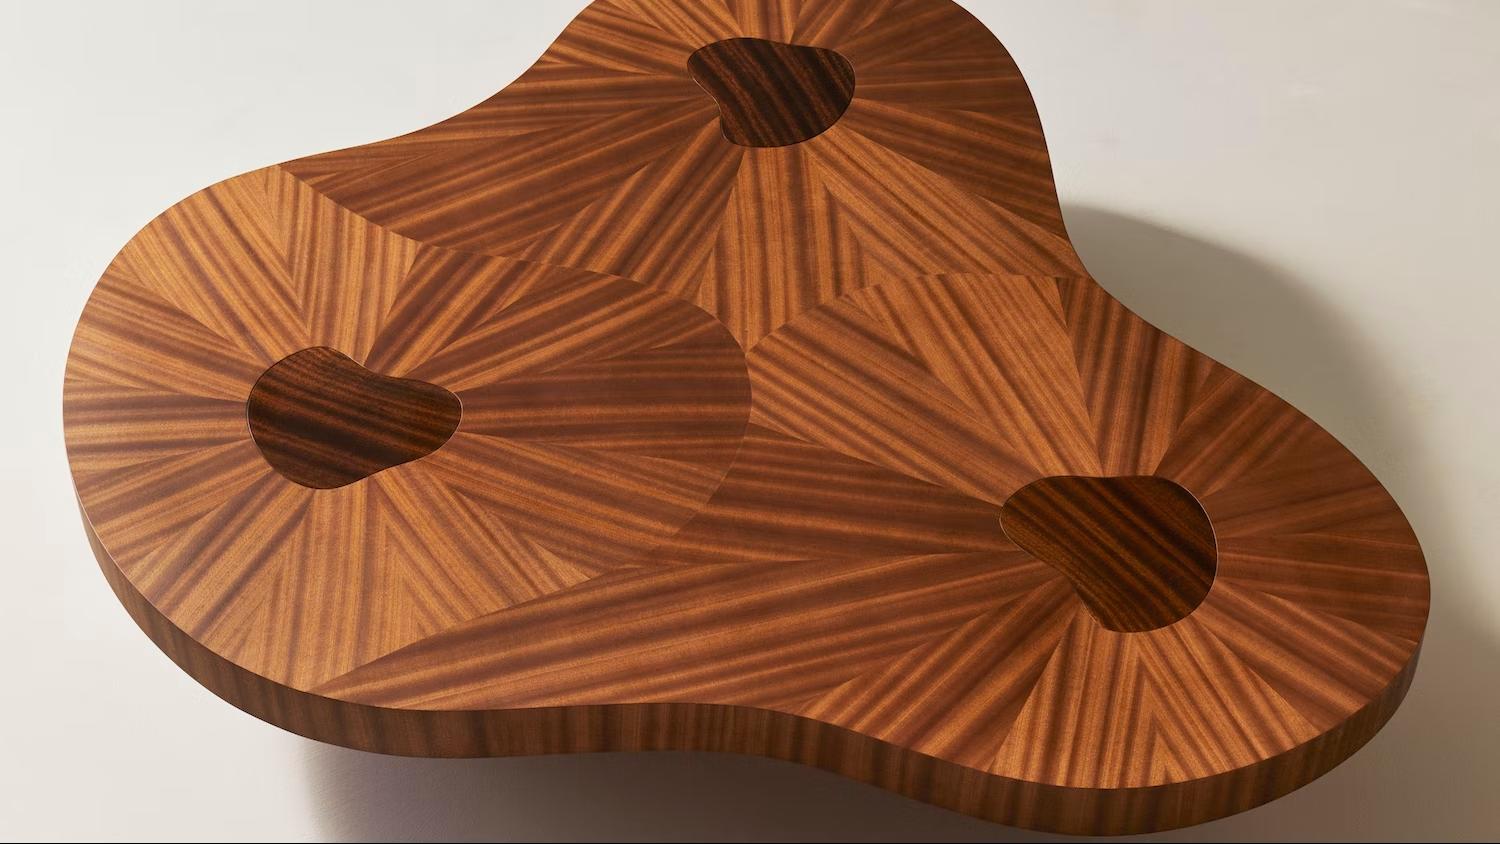 An evolution of the Cloud Table, showcasing the same gravity-softening design but with stouter proportions. The high-gloss table legs are uniquely shaped, creating the appearance of placid pools on the tabletop. The stunning marquetry work changes